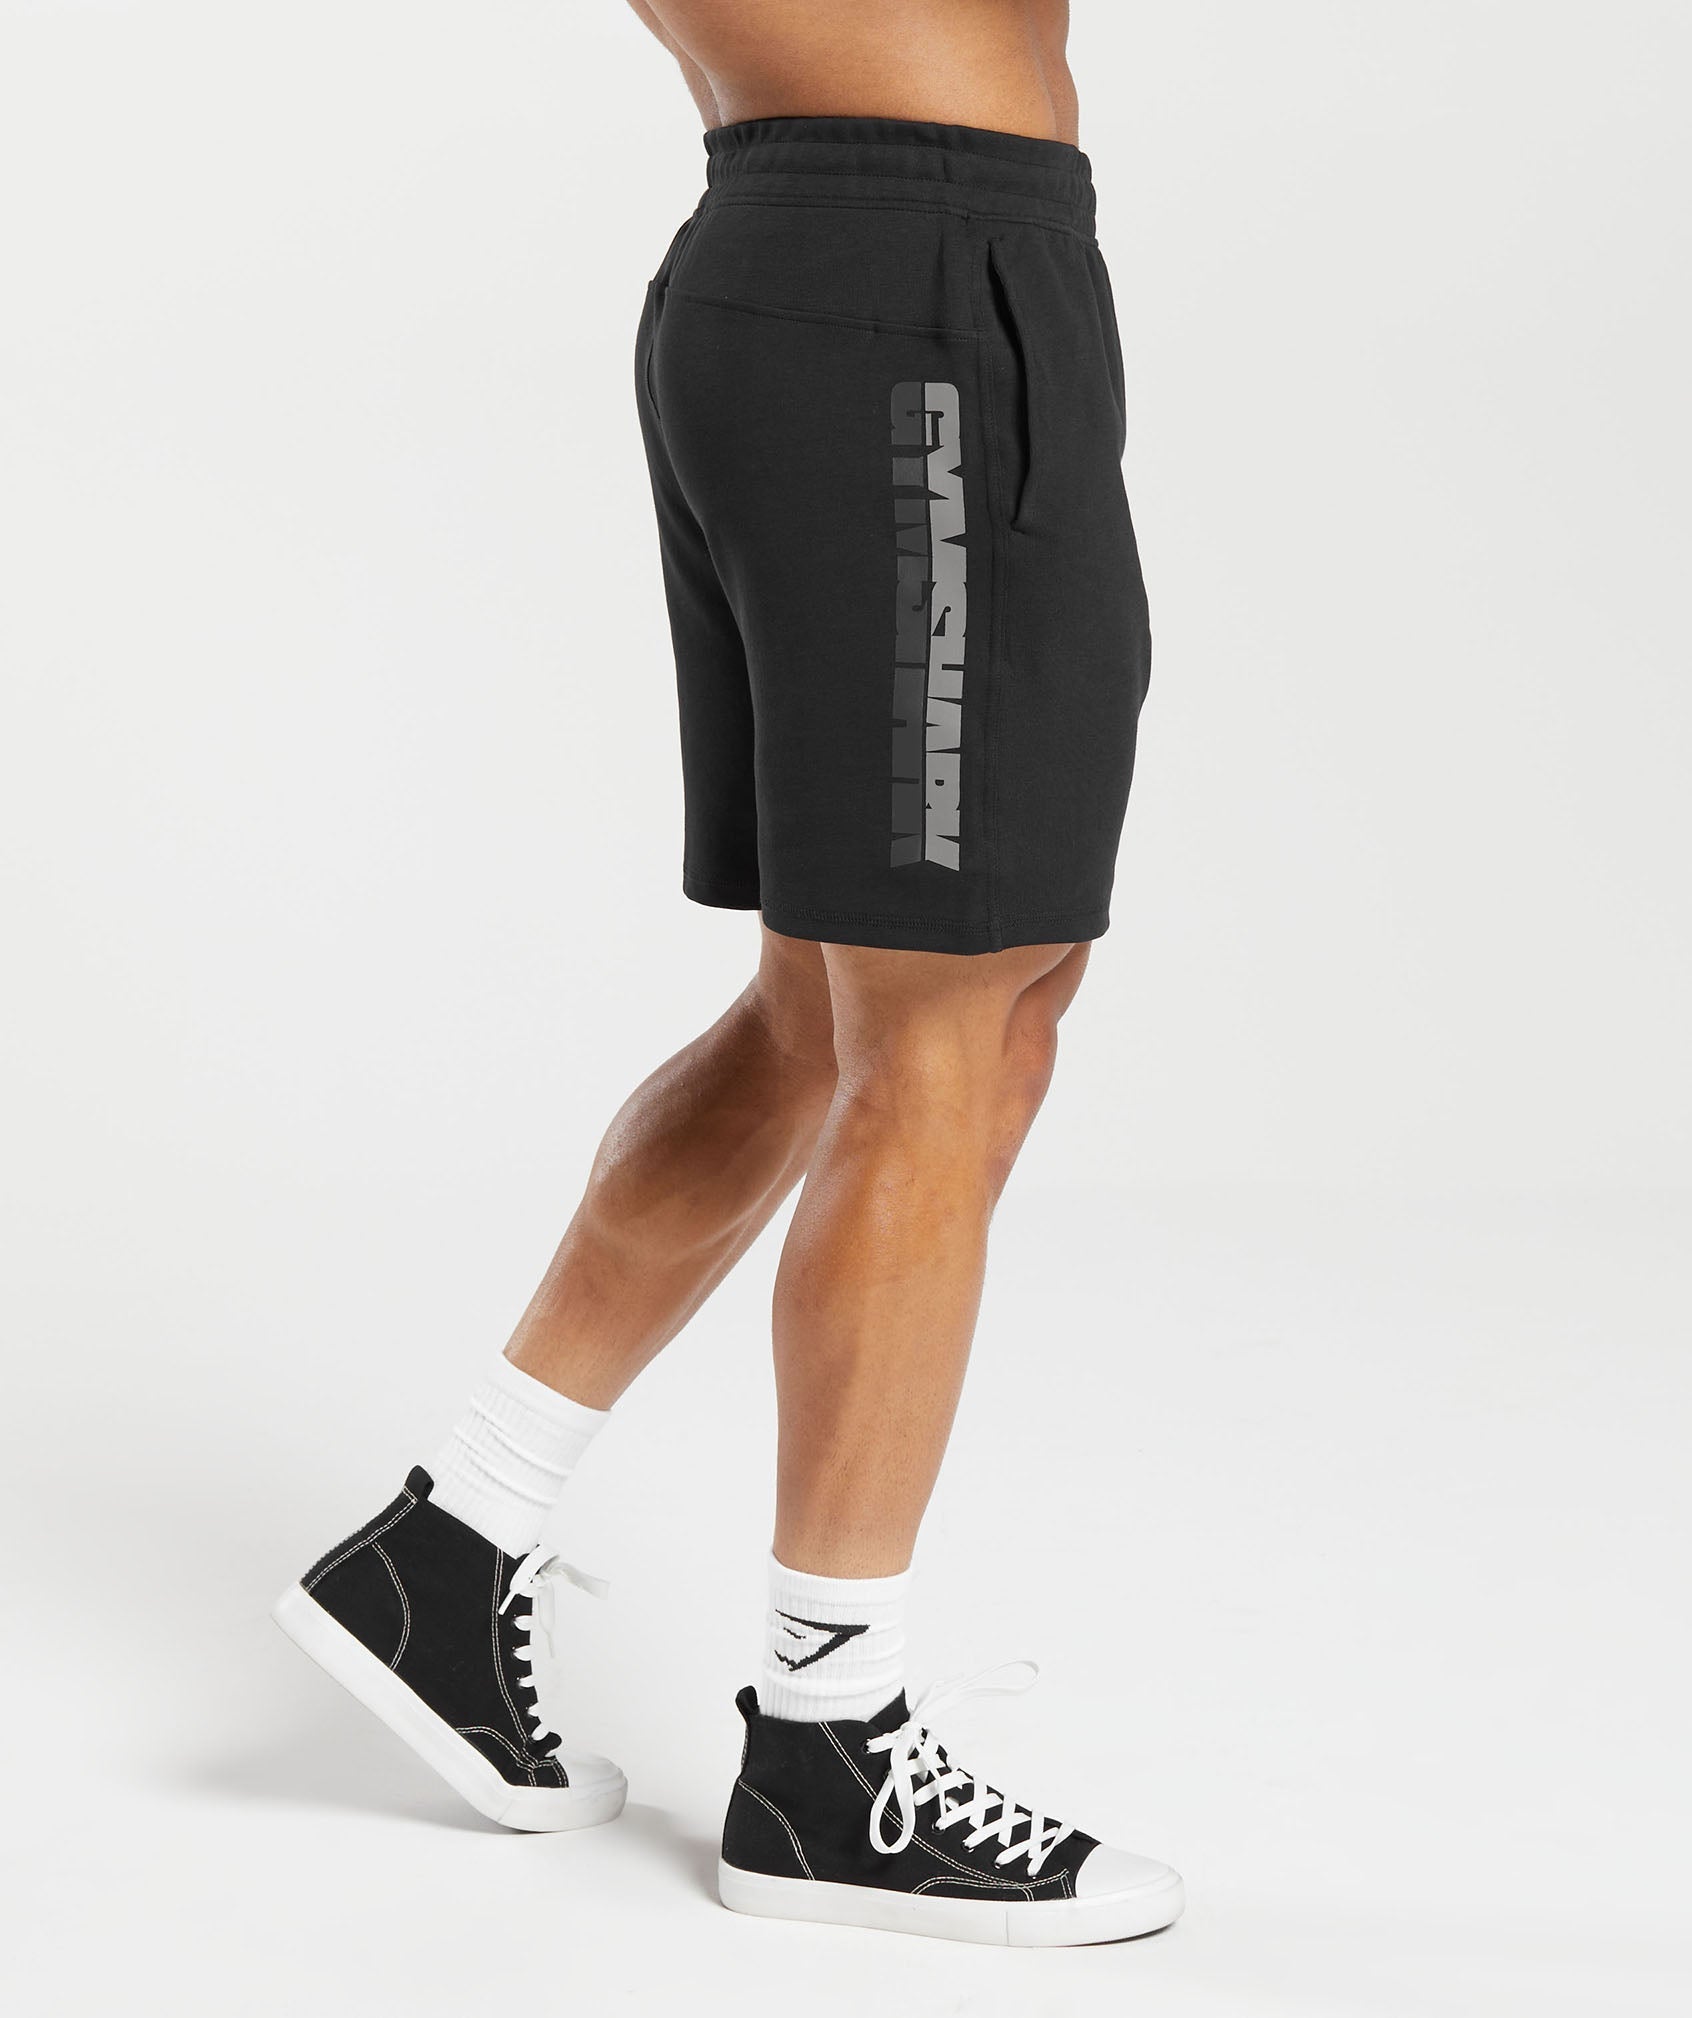 Bold 7" Shorts in Black - view 4